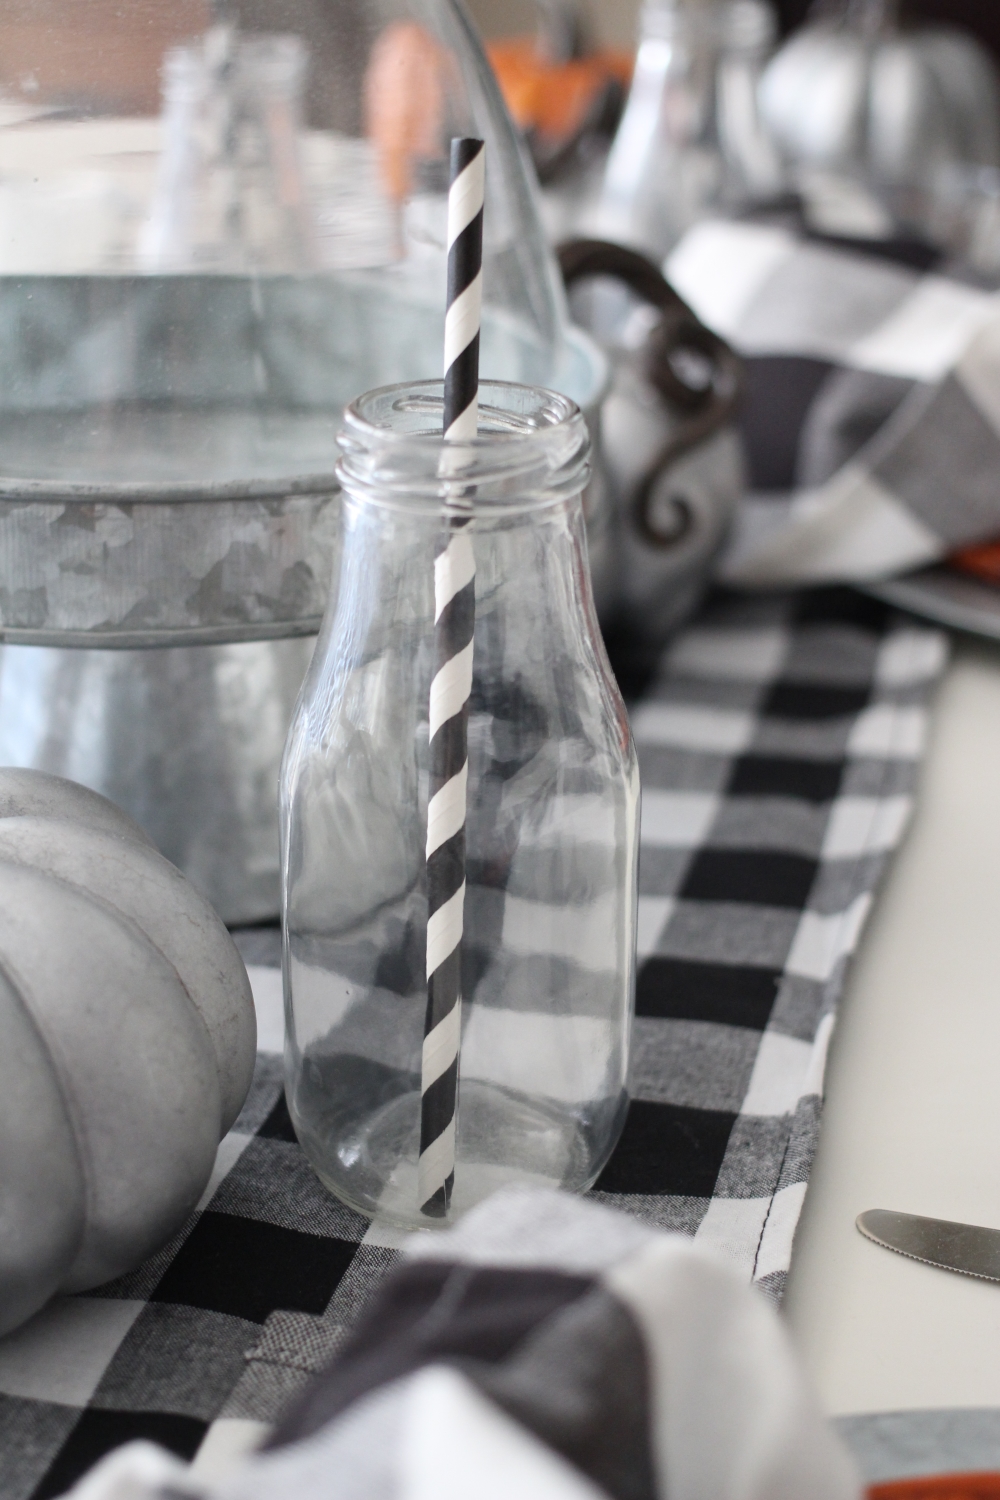 I love decorating for the holidays and I set up my decorations as early as I can and my Black and White Buffalo Plaid Thanksgiving Tablescape is ready to go. Click here to see more from Polka Dotted Blue Jay. 